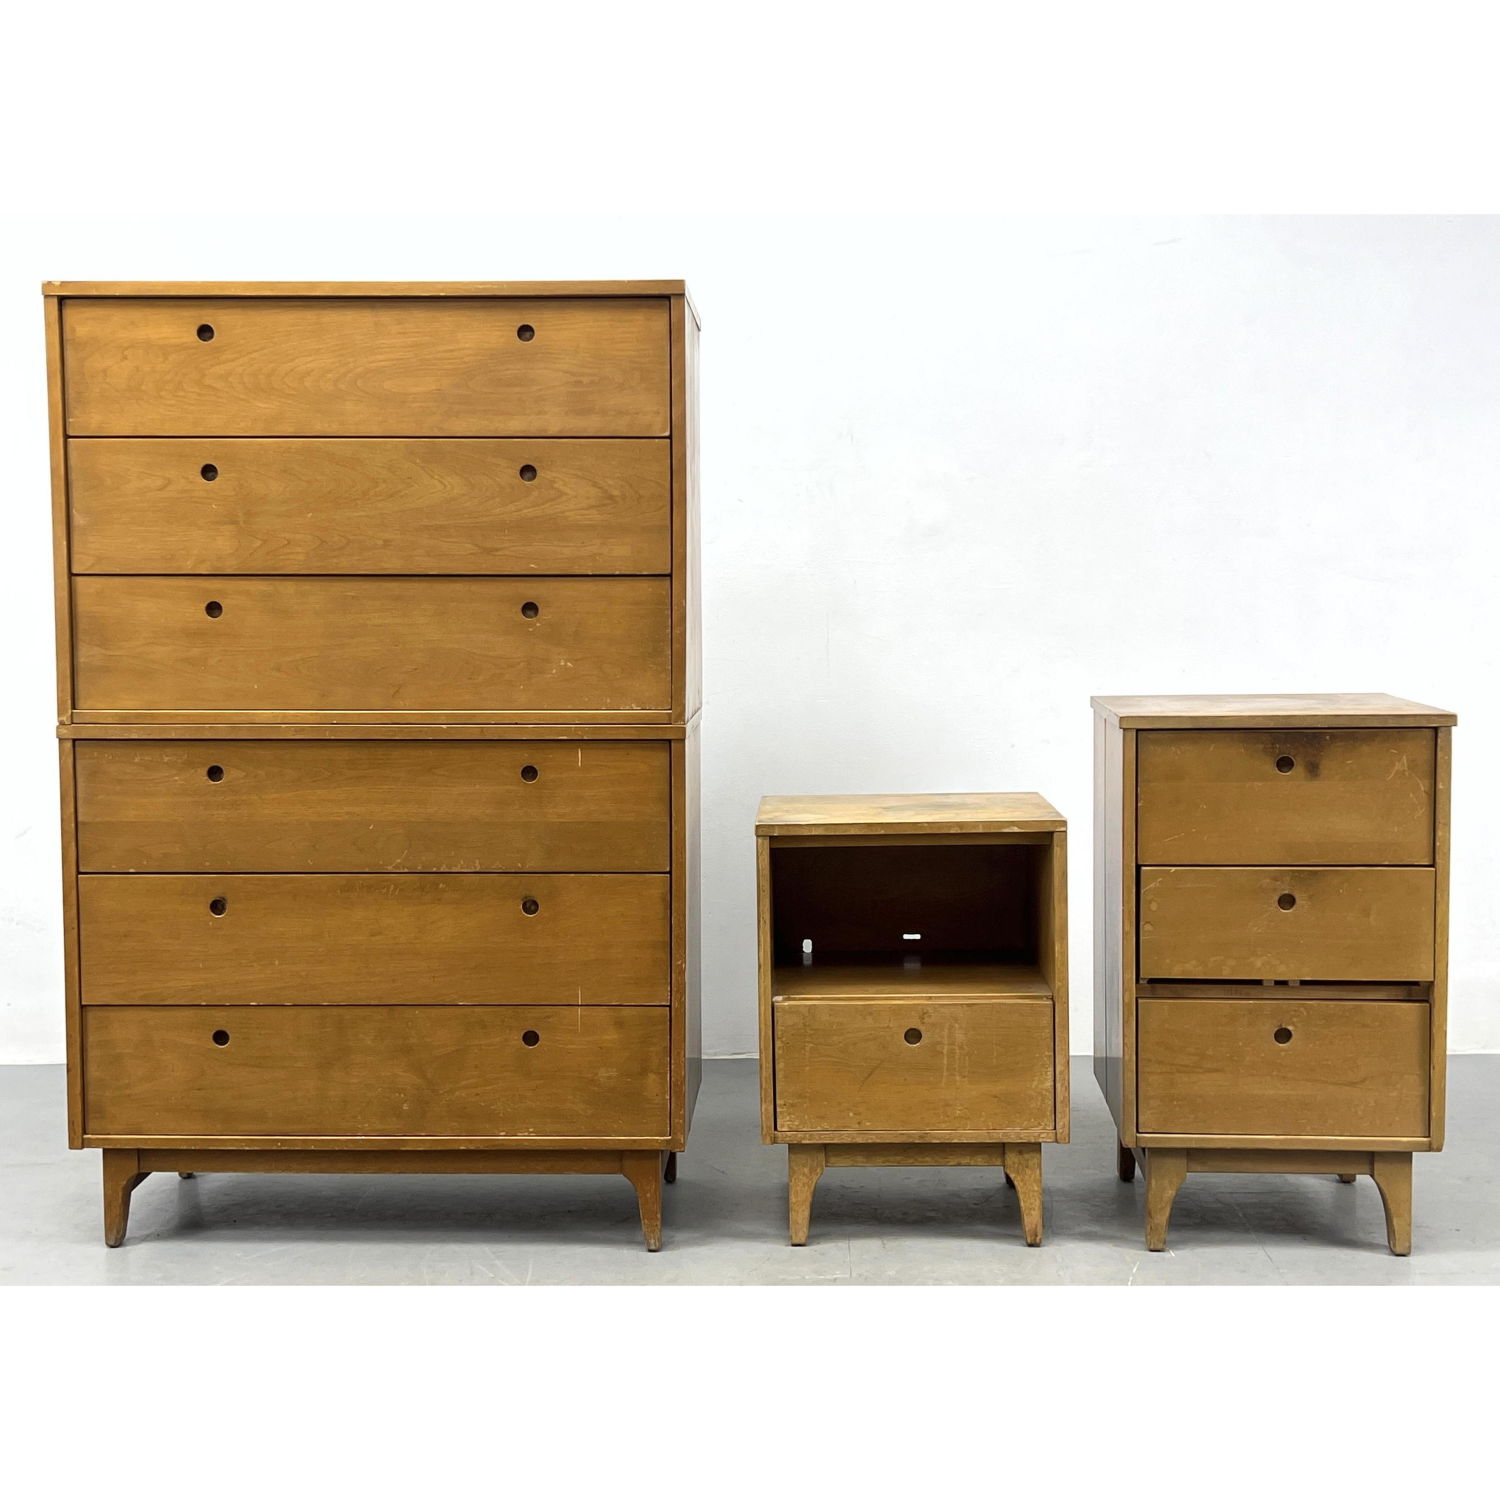 3pc FRENCH and HEALD Bedroom Furniture  2ff2f4